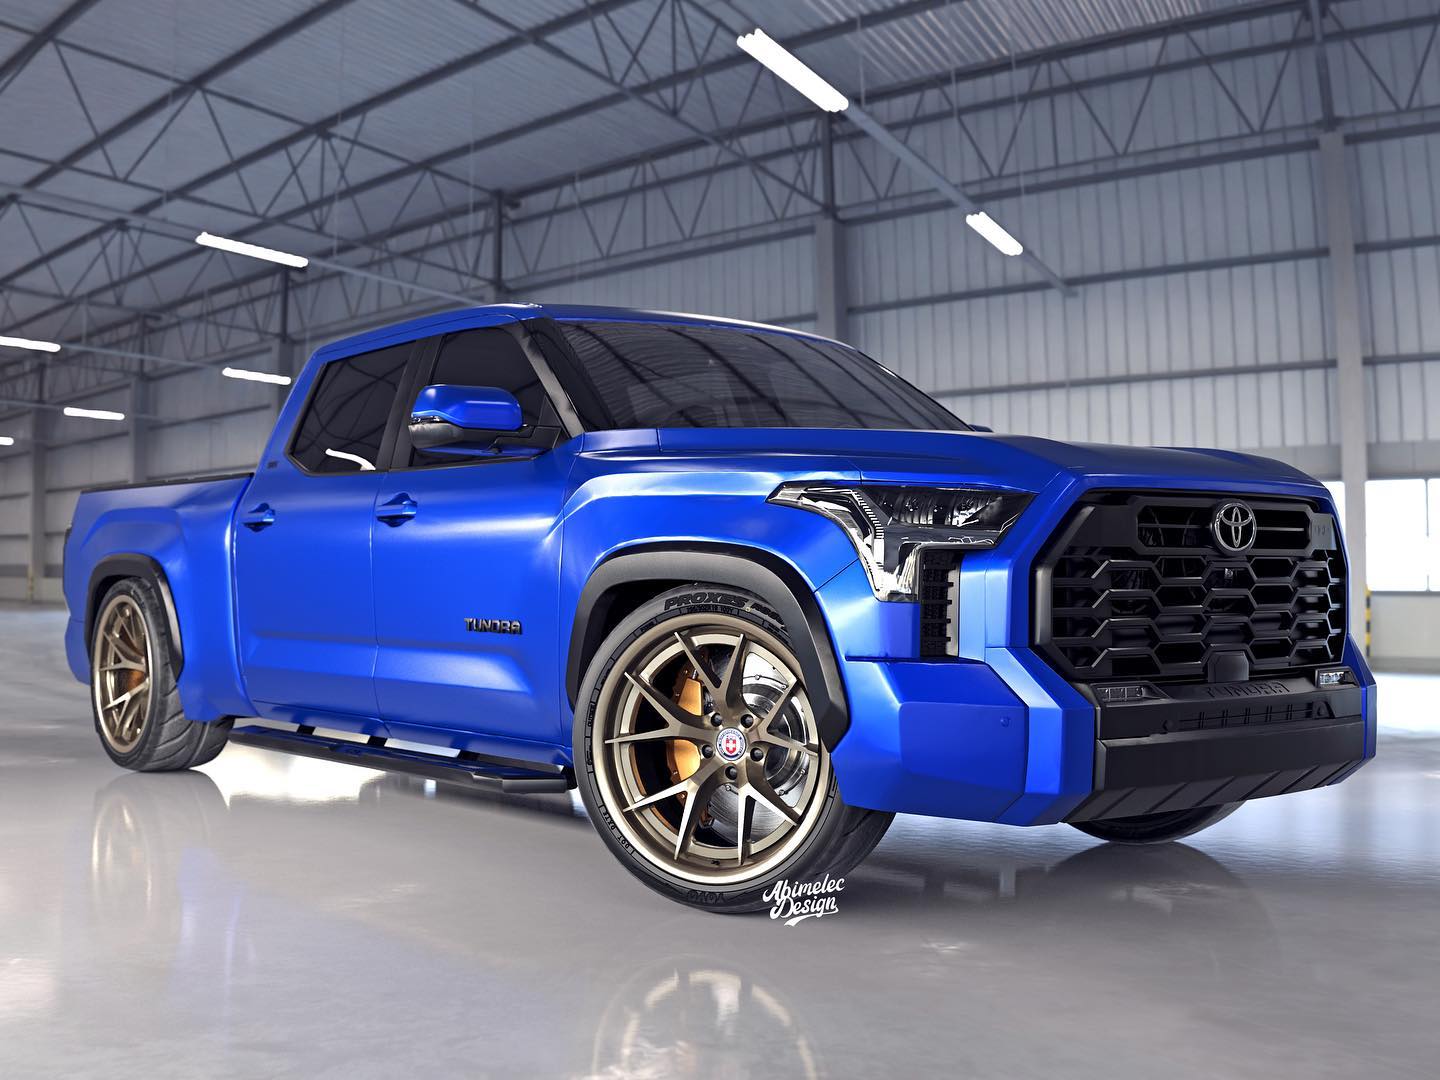 Frozen 2023 Toyota Tundra Sitting Lowered on HREs Has the Right CGI